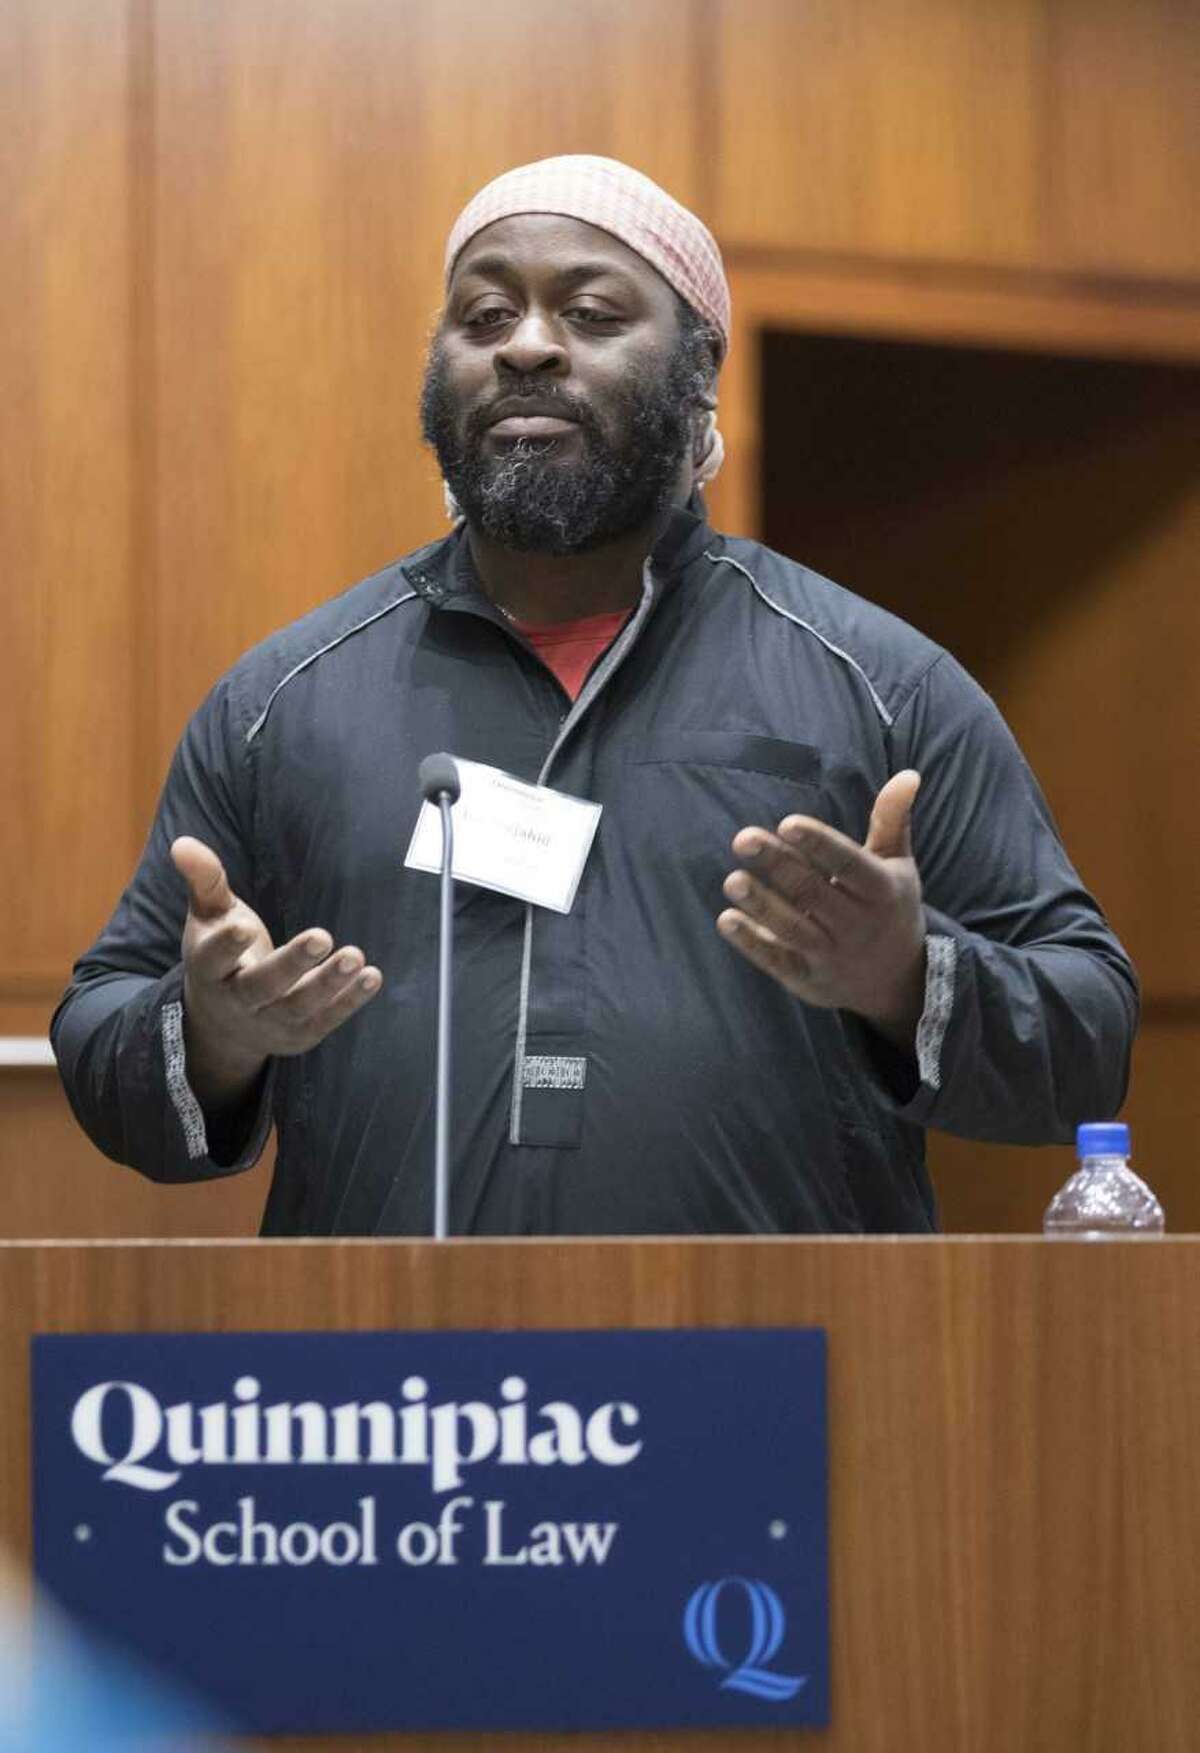 Isa Mujahid, who received the Quinnipiac University Black Law Students Association's Community Service Award, is the founder of CTCORE-Organize Now, an organization that advocates for racial justice.